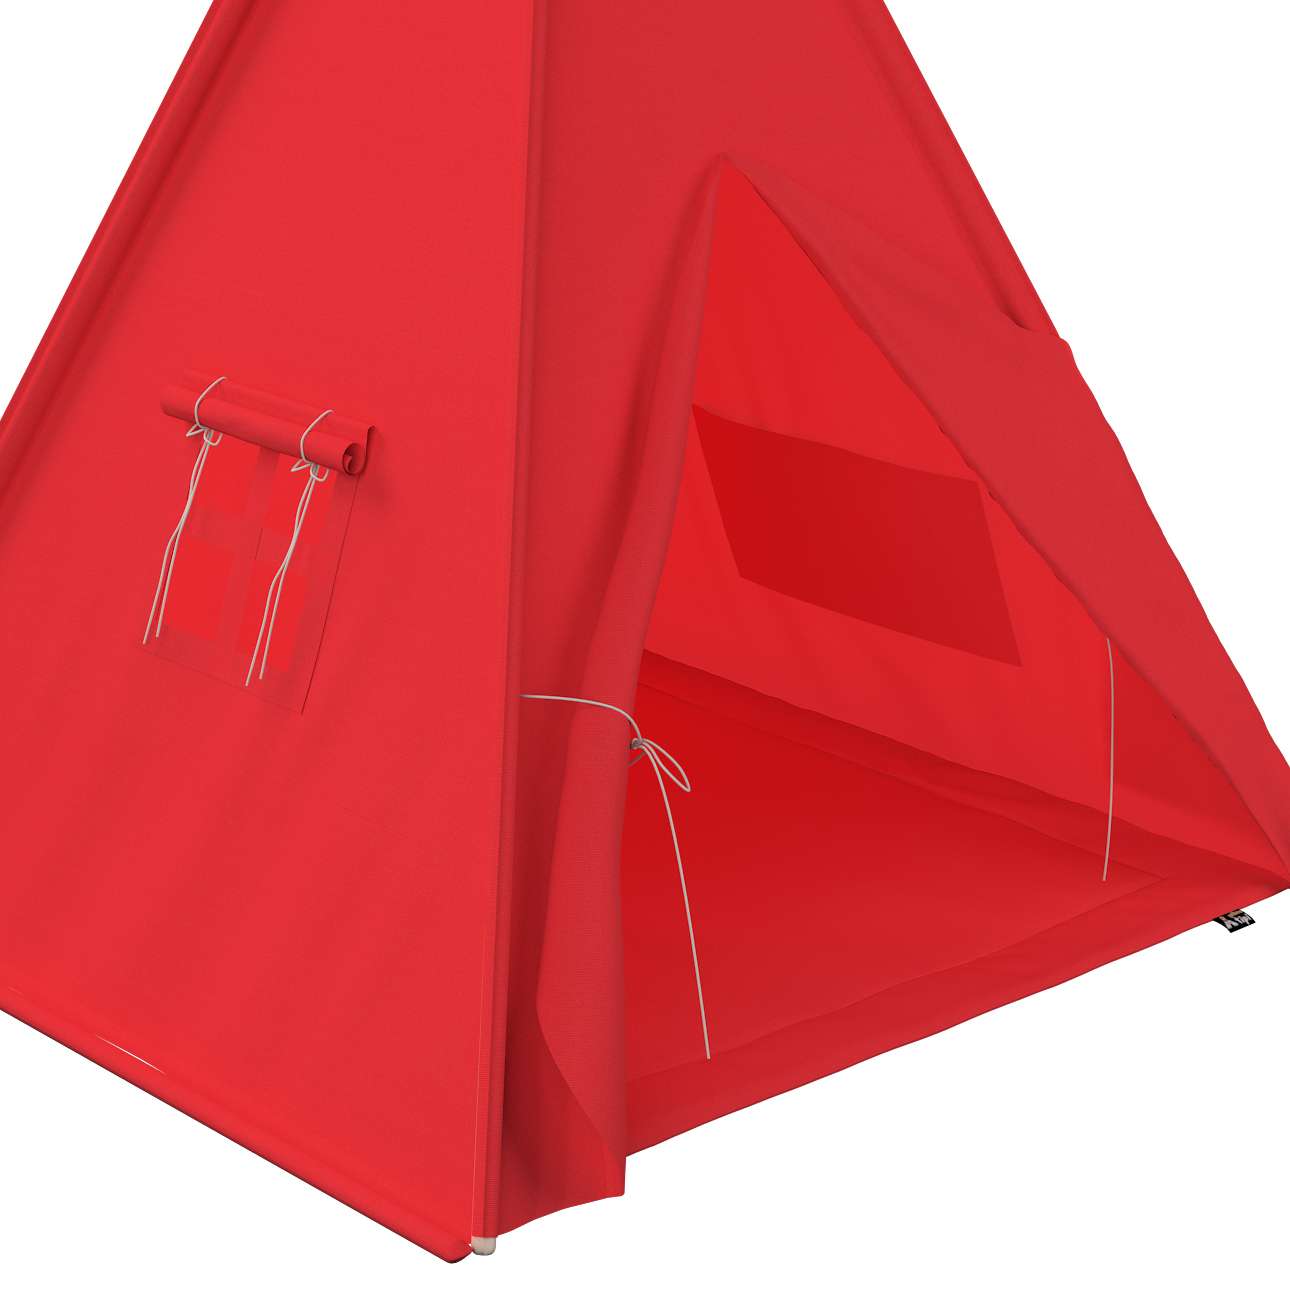 Tepee mat - 110x110 (Happiness) - red